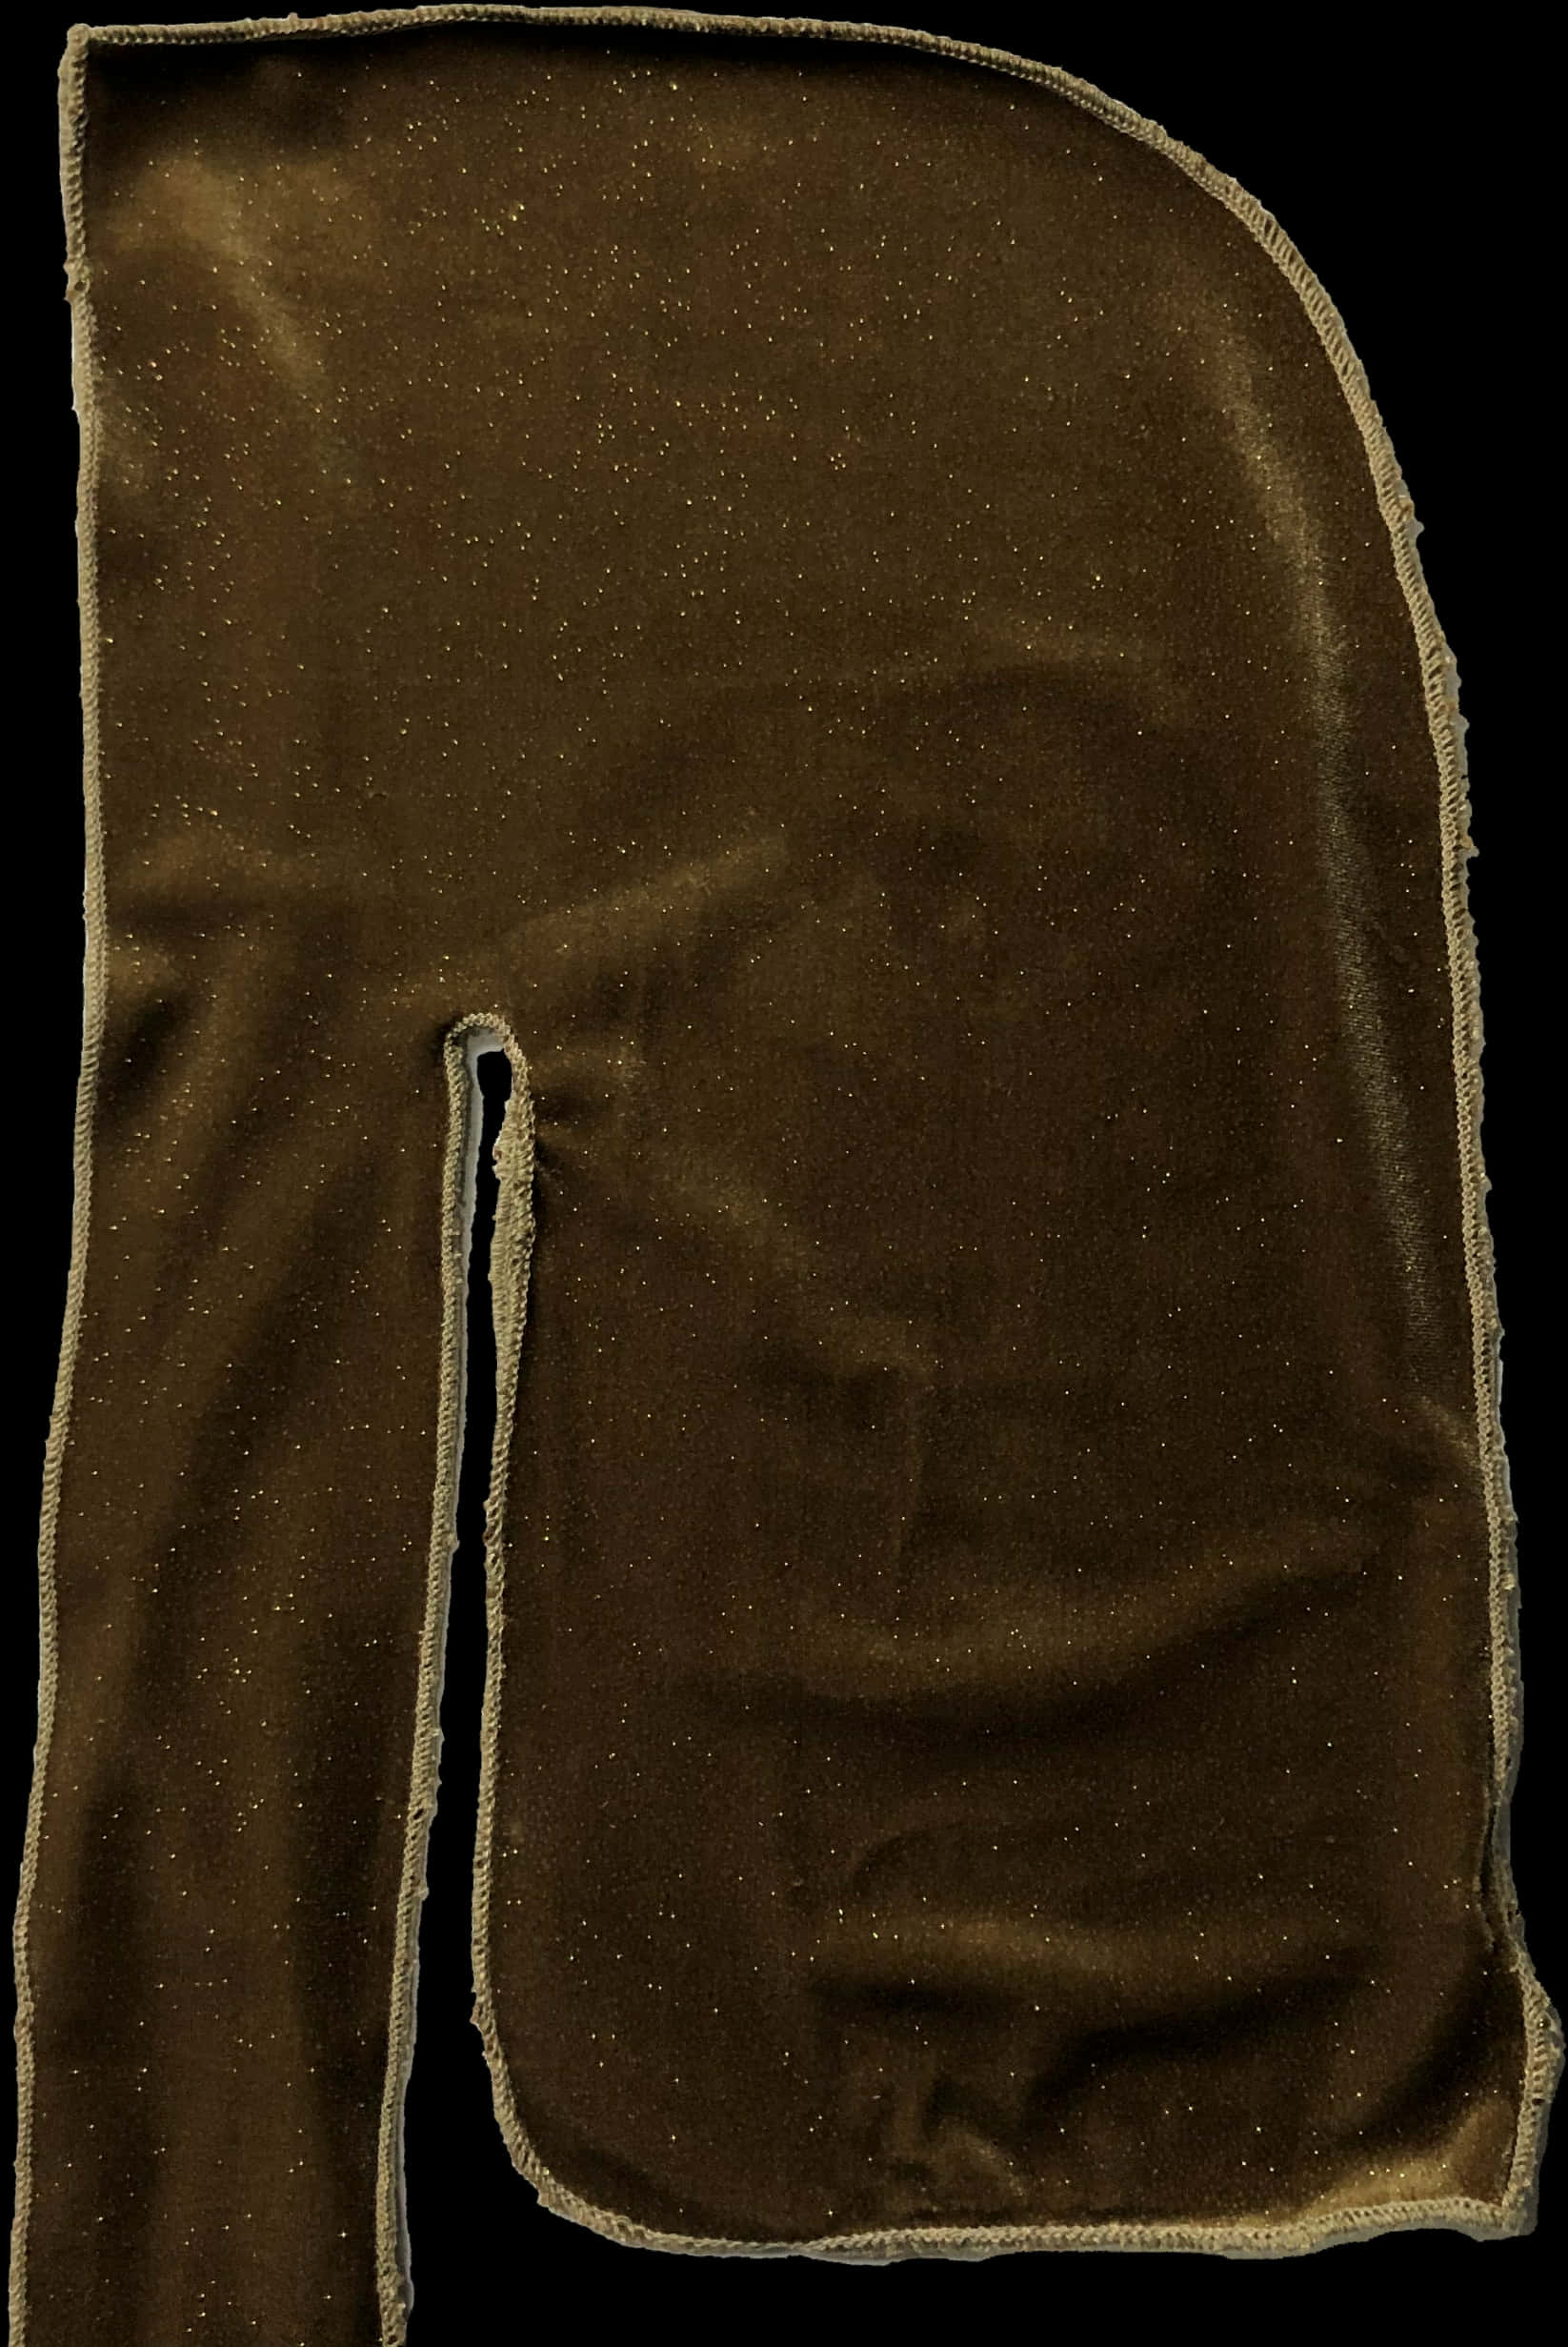 A Brown Velvet Pants With A Black Background